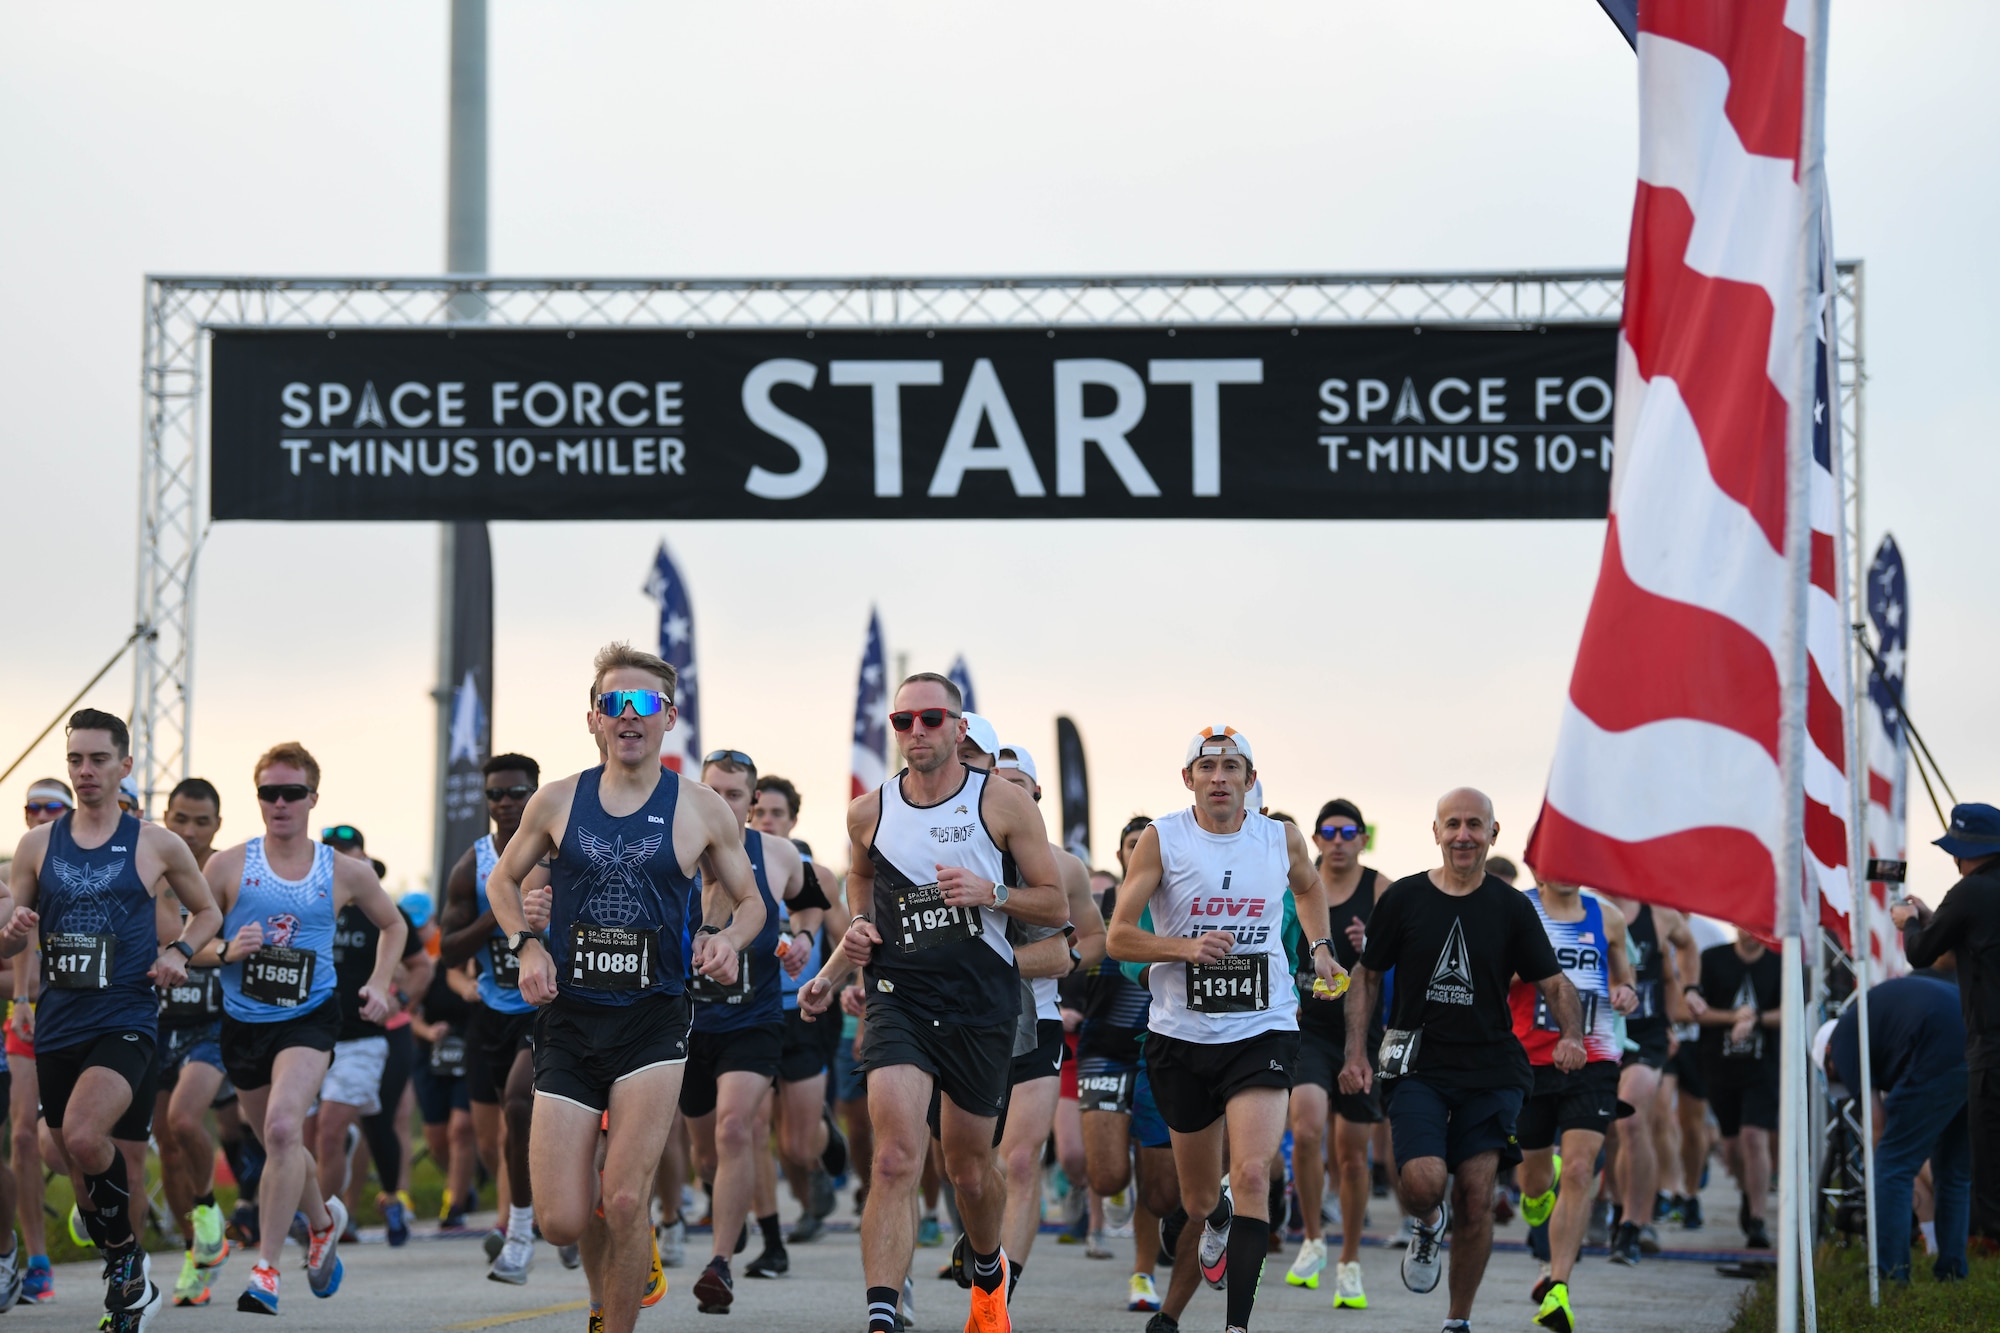 Participants cross the start line at the T-Minus 10-Miler on Dec. 10, 2022, at Cape Canaveral Space Force Station, Fla. The T-Minus 10-Miler celebrates the Space Forces birthday.